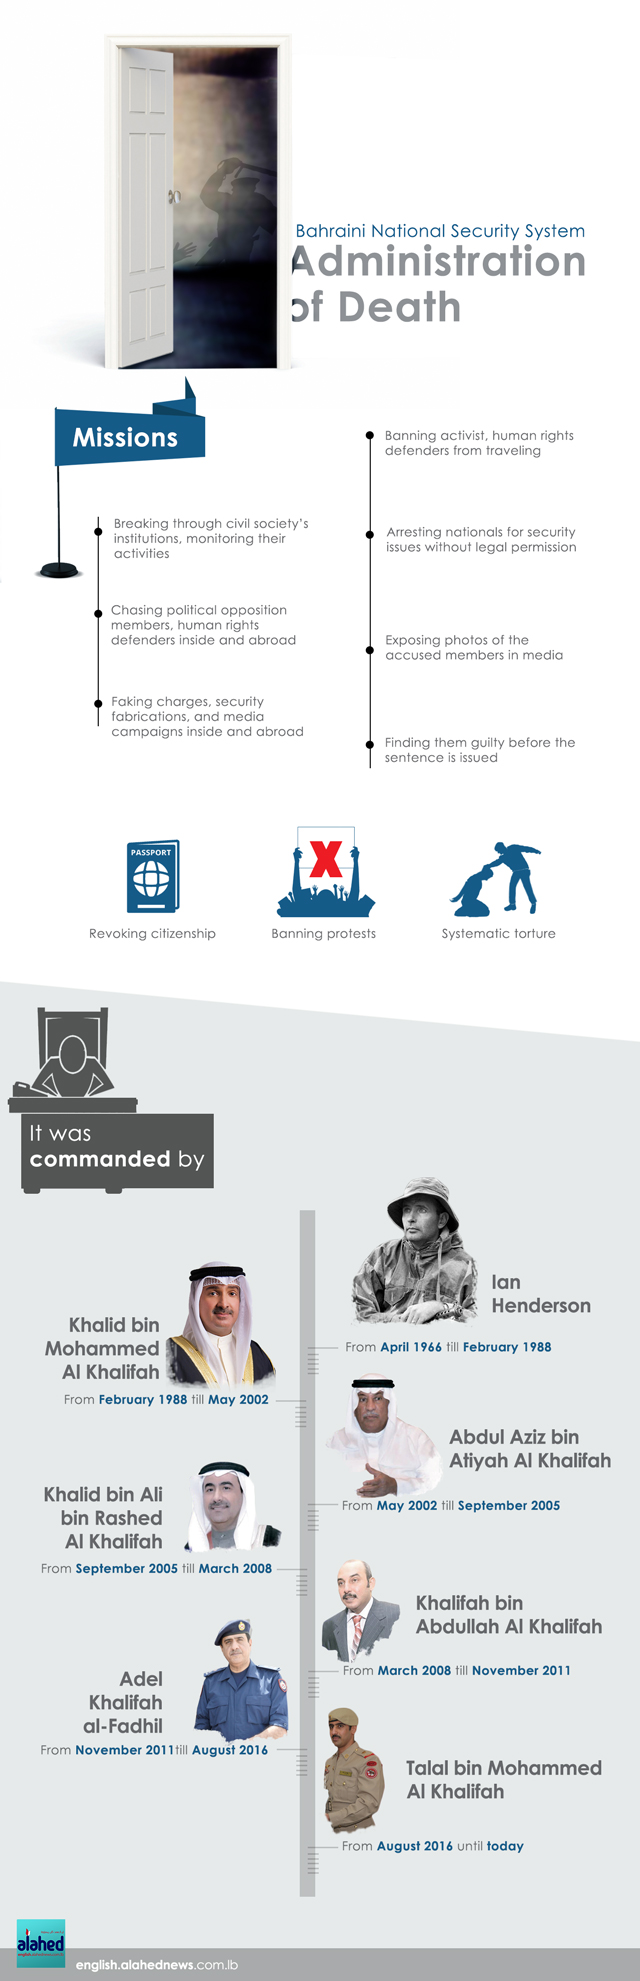 Bahraini National Security System [info graphics]